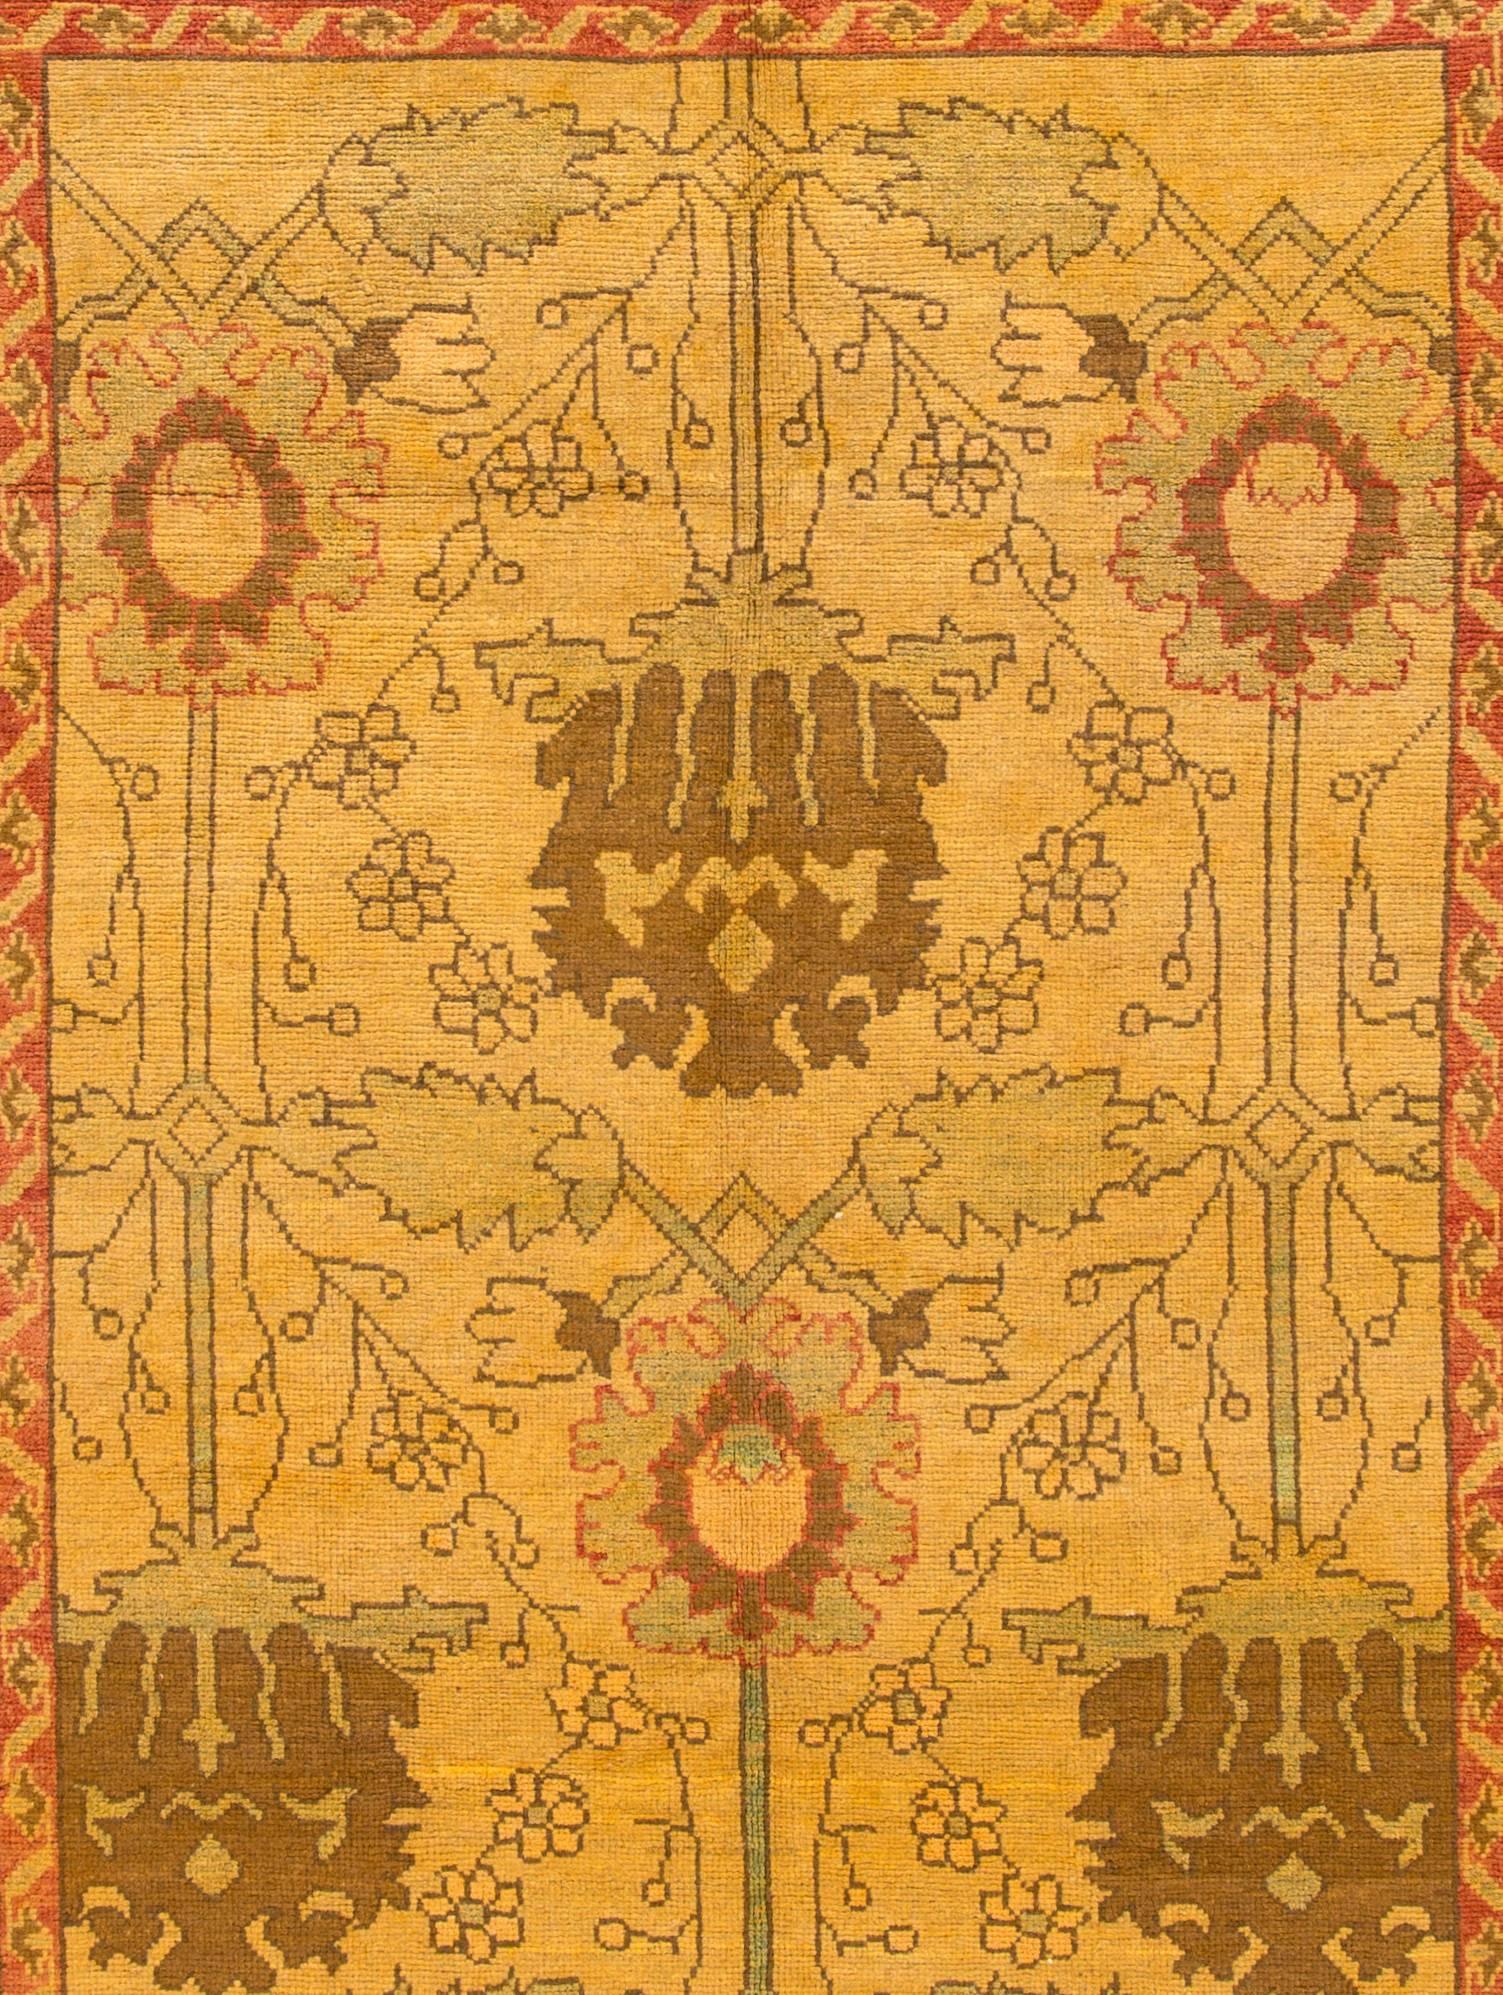 Hand-Knotted Highly Contrasted Vintage Beige Oushak-Style Rug, 7.11x10.09 For Sale